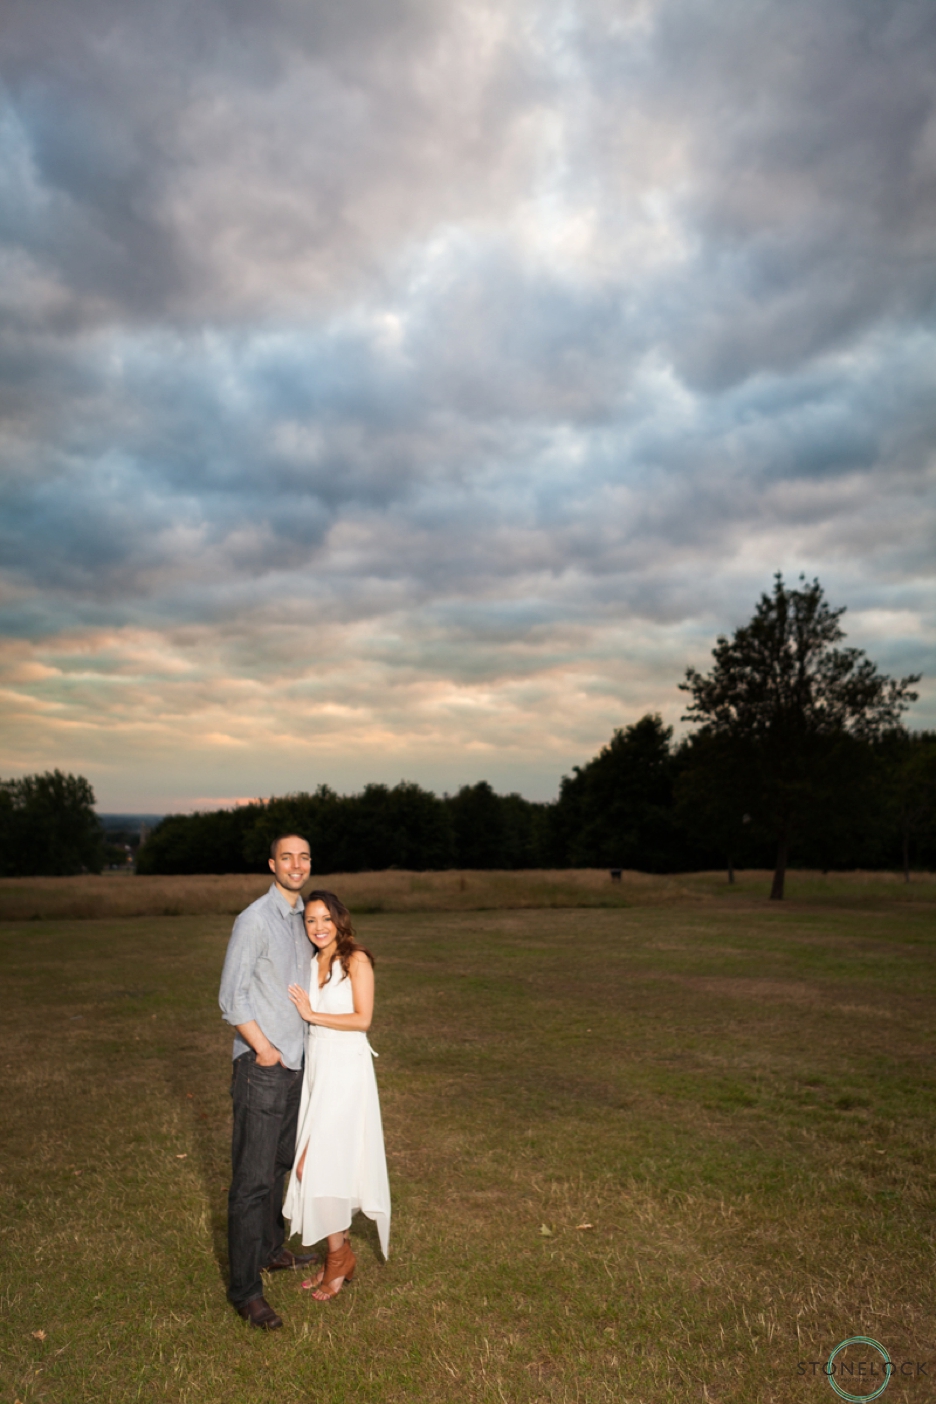 Golden Hour engagement photography on Streatham Common, South London